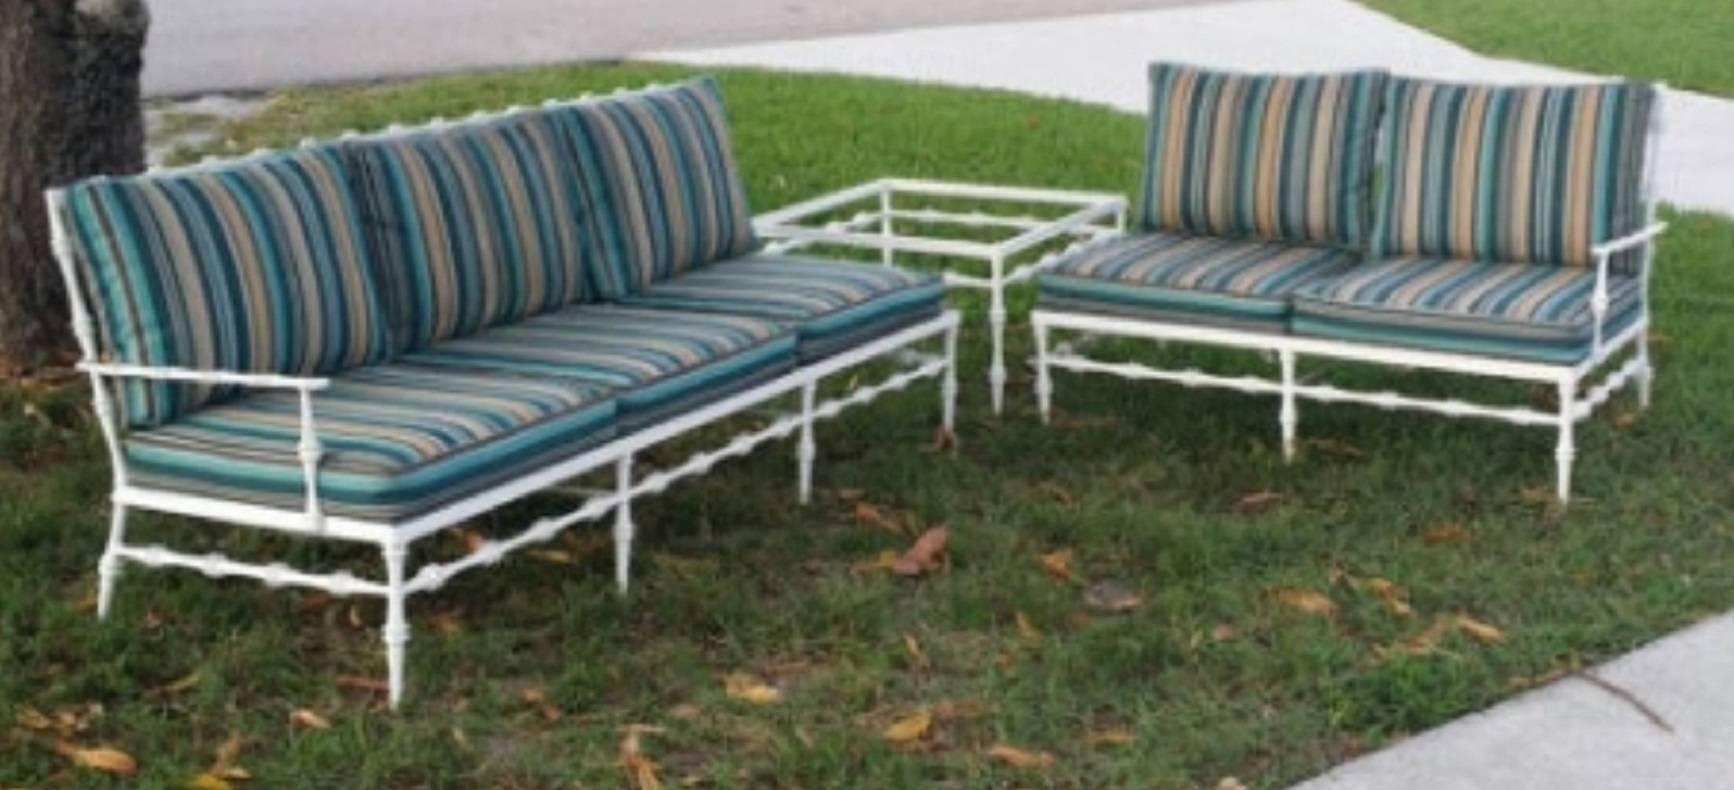 Amazing Aluminum 4 piece patio, porch, outdoor, sunroom set. This set includes the following: sofa / couch, settee / loveseat, coffee cocktail table and end / side table all with glass tops. The cushions pictured are also included. I have several